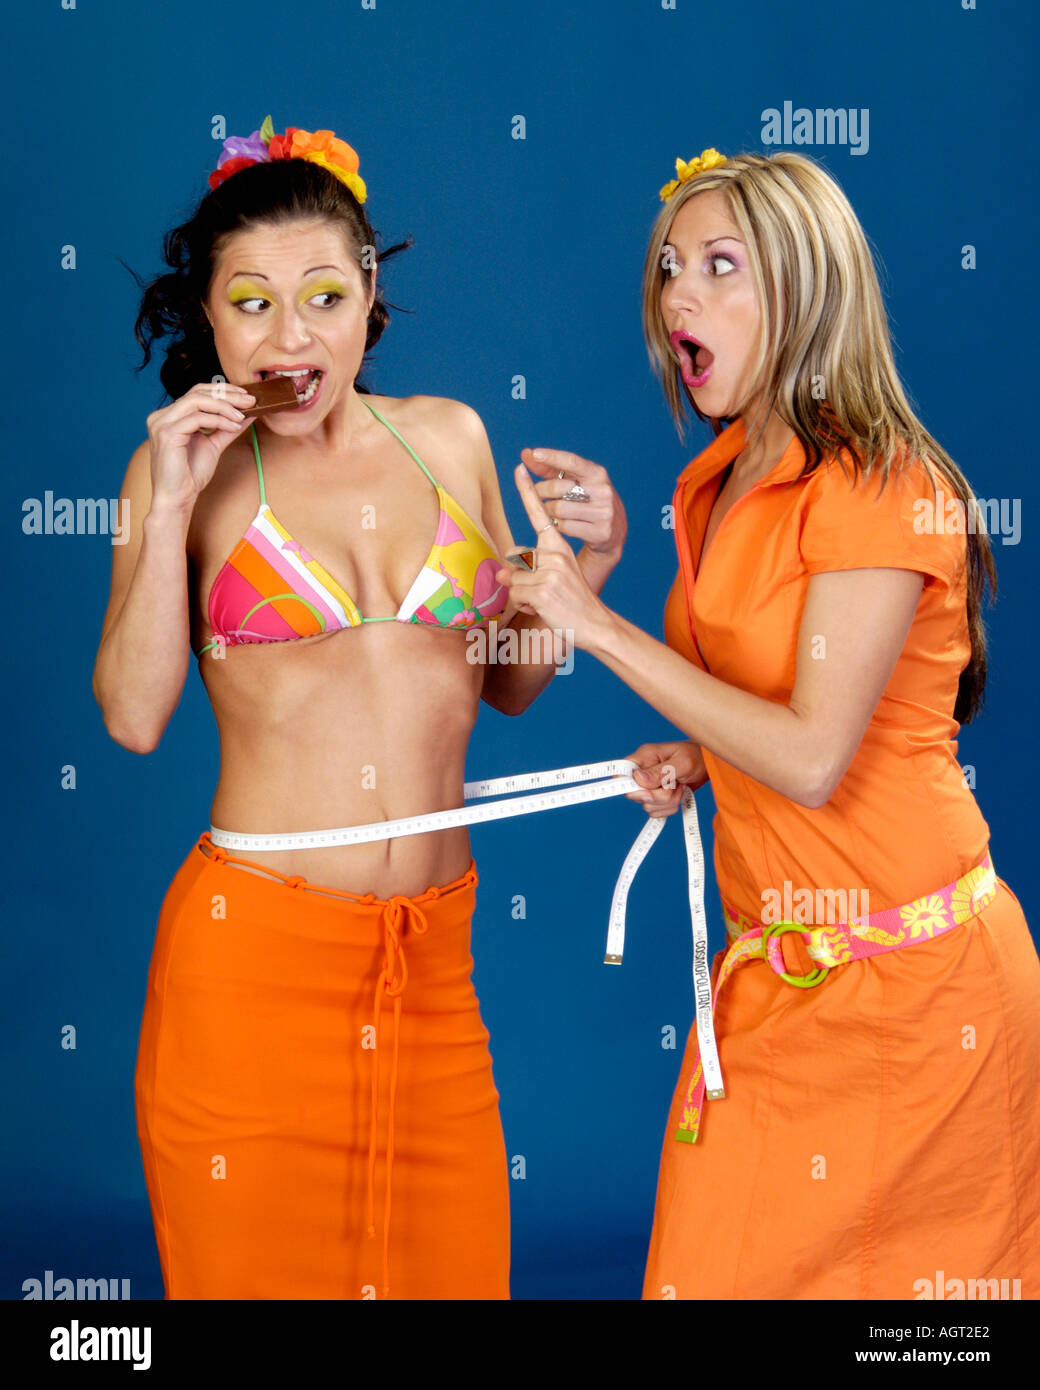 Woman warns friend about eating chocolate Stock Photo